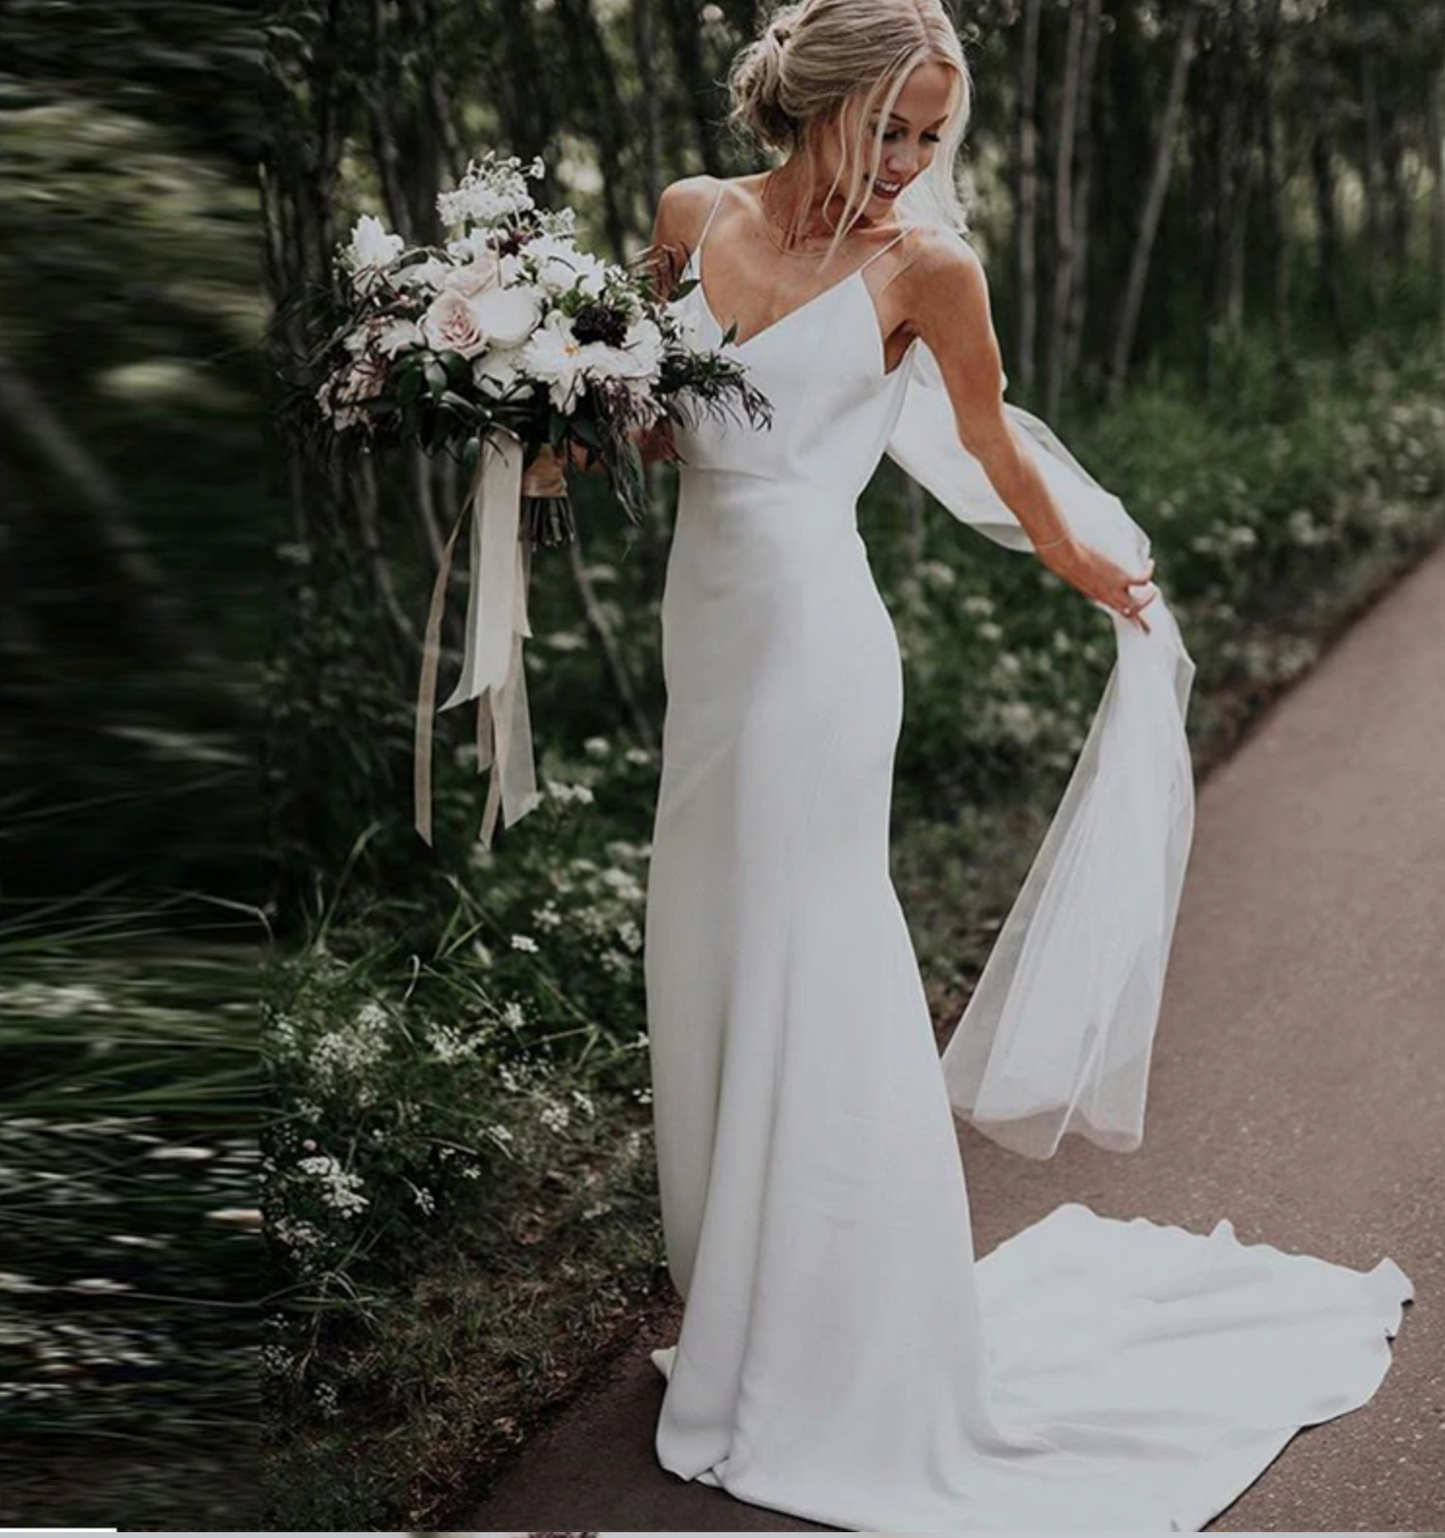 Bustle - Wedding Dresses in Baton Rouge, LA Bridal boutique with Wedding  Dresses, Bridesmaid Dresses, and Wedding Accessories